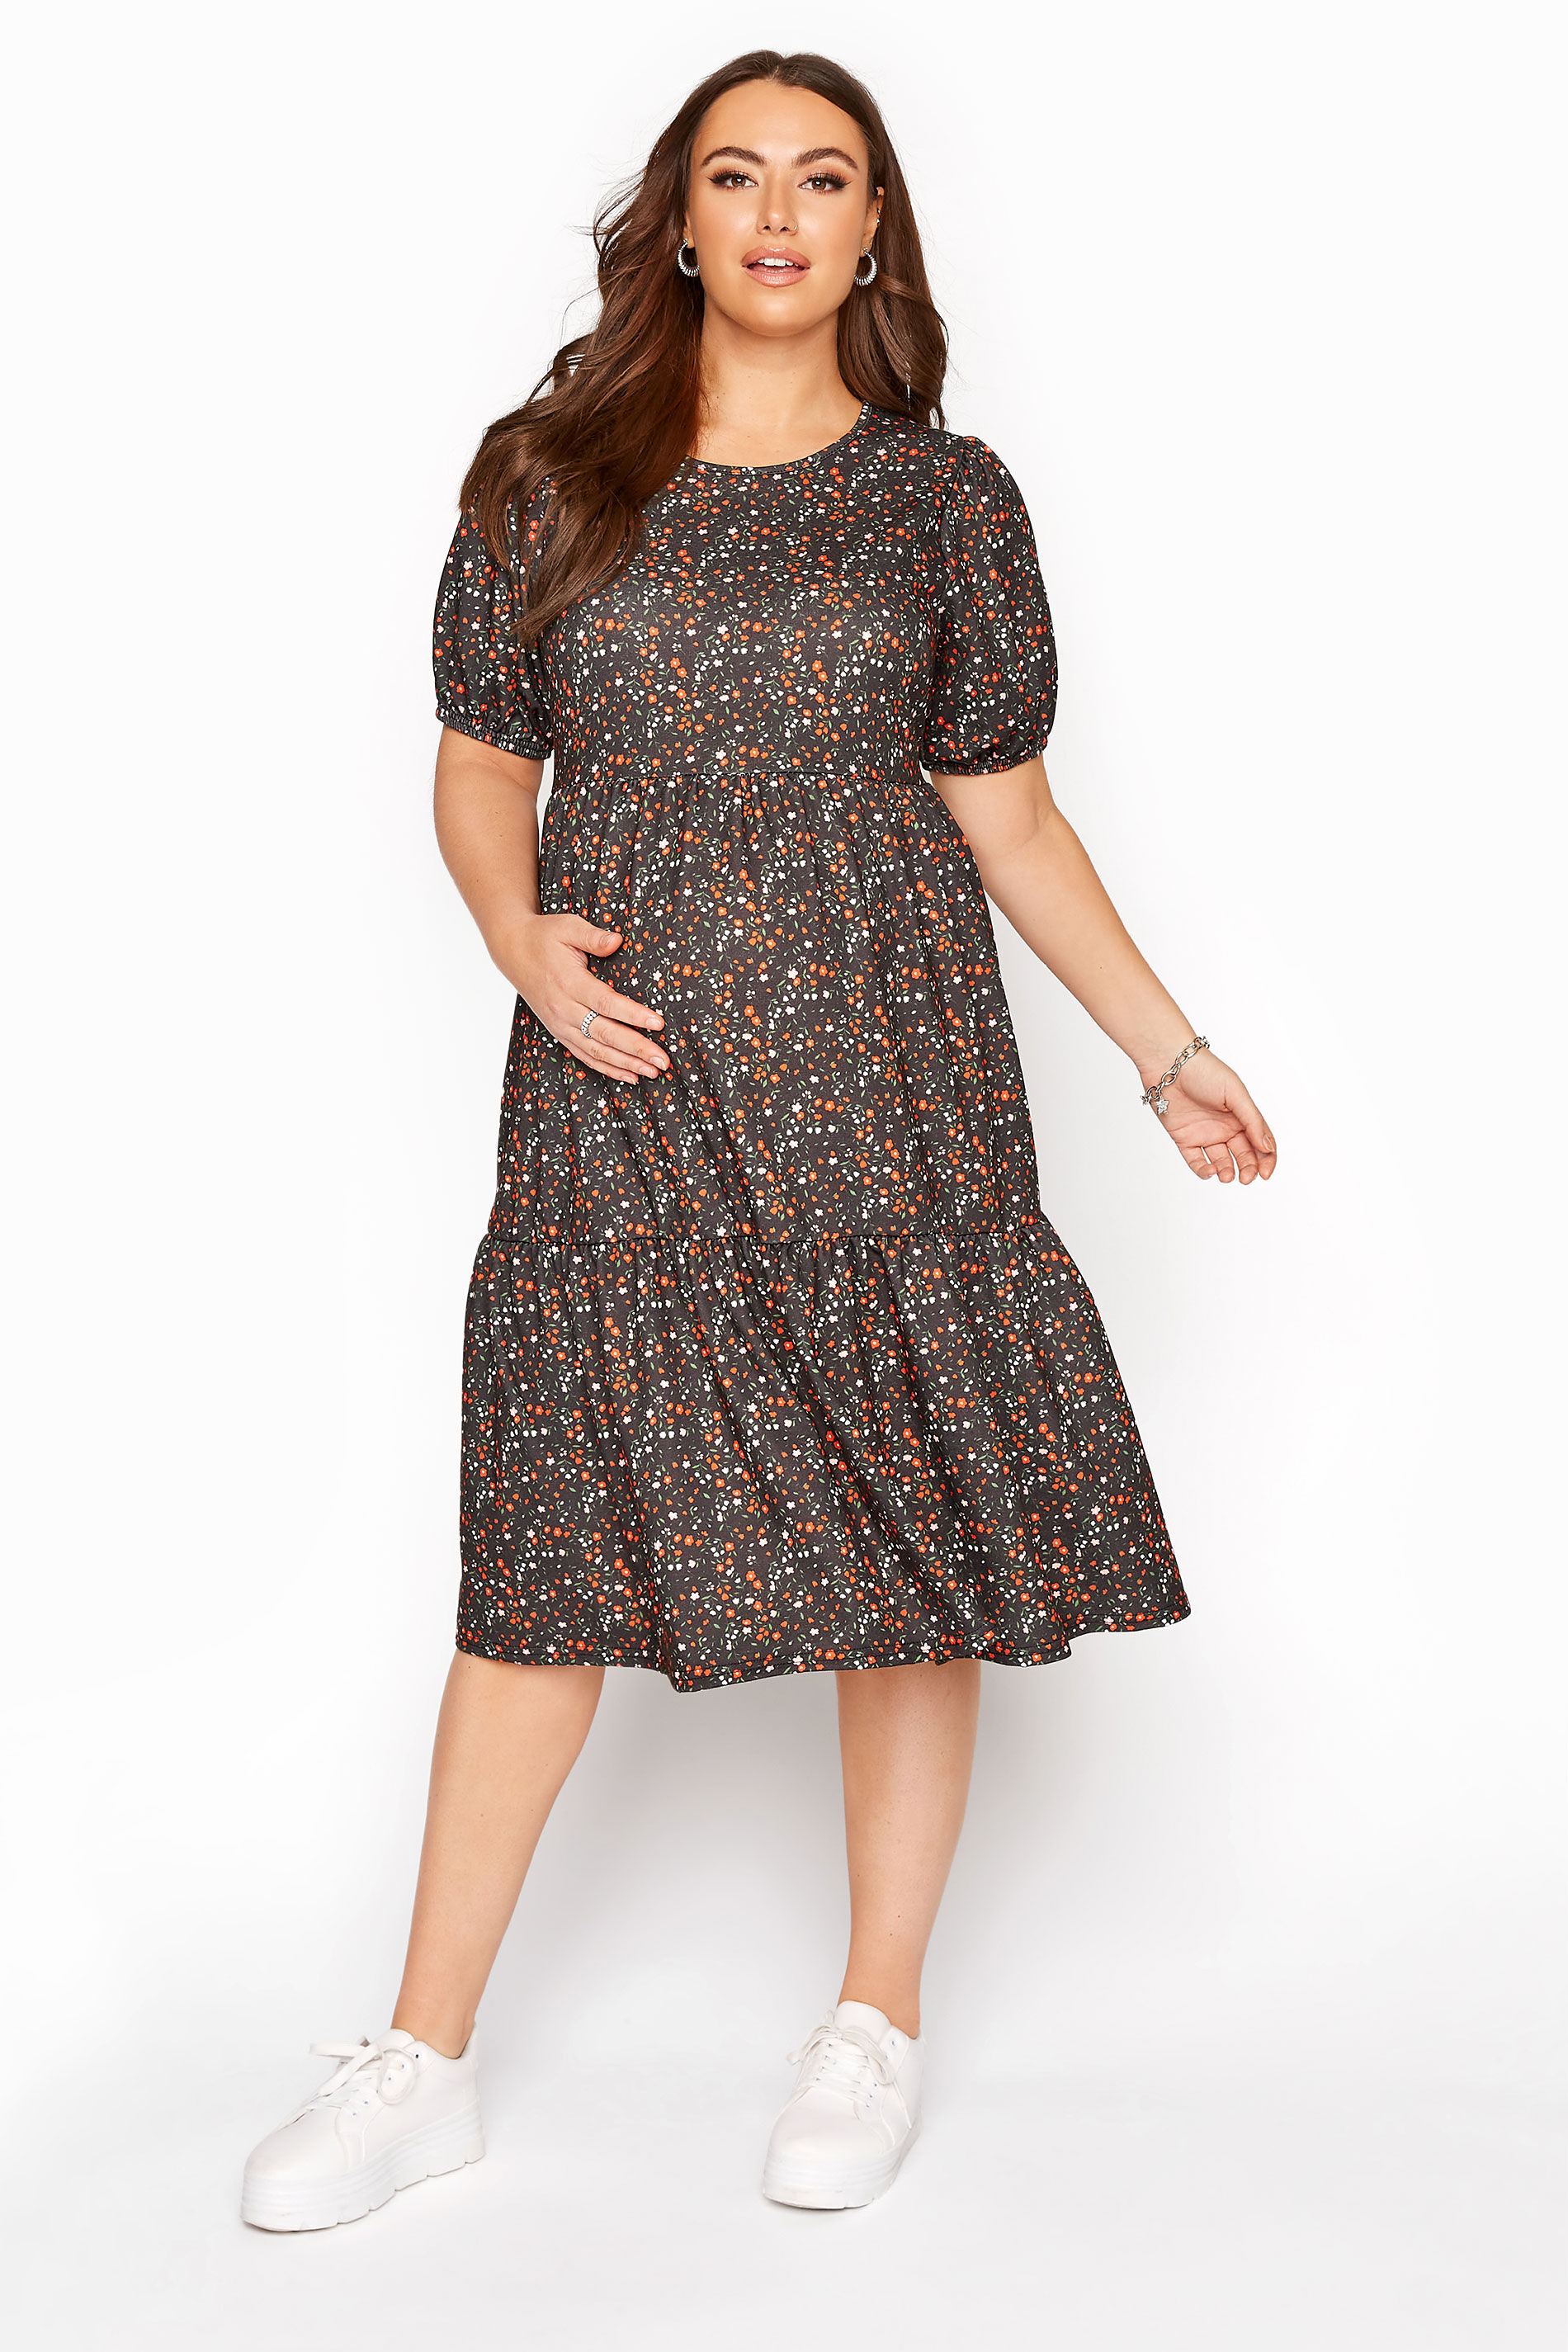 Yours Clothing Bump it up maternity black floral tiered smock dress